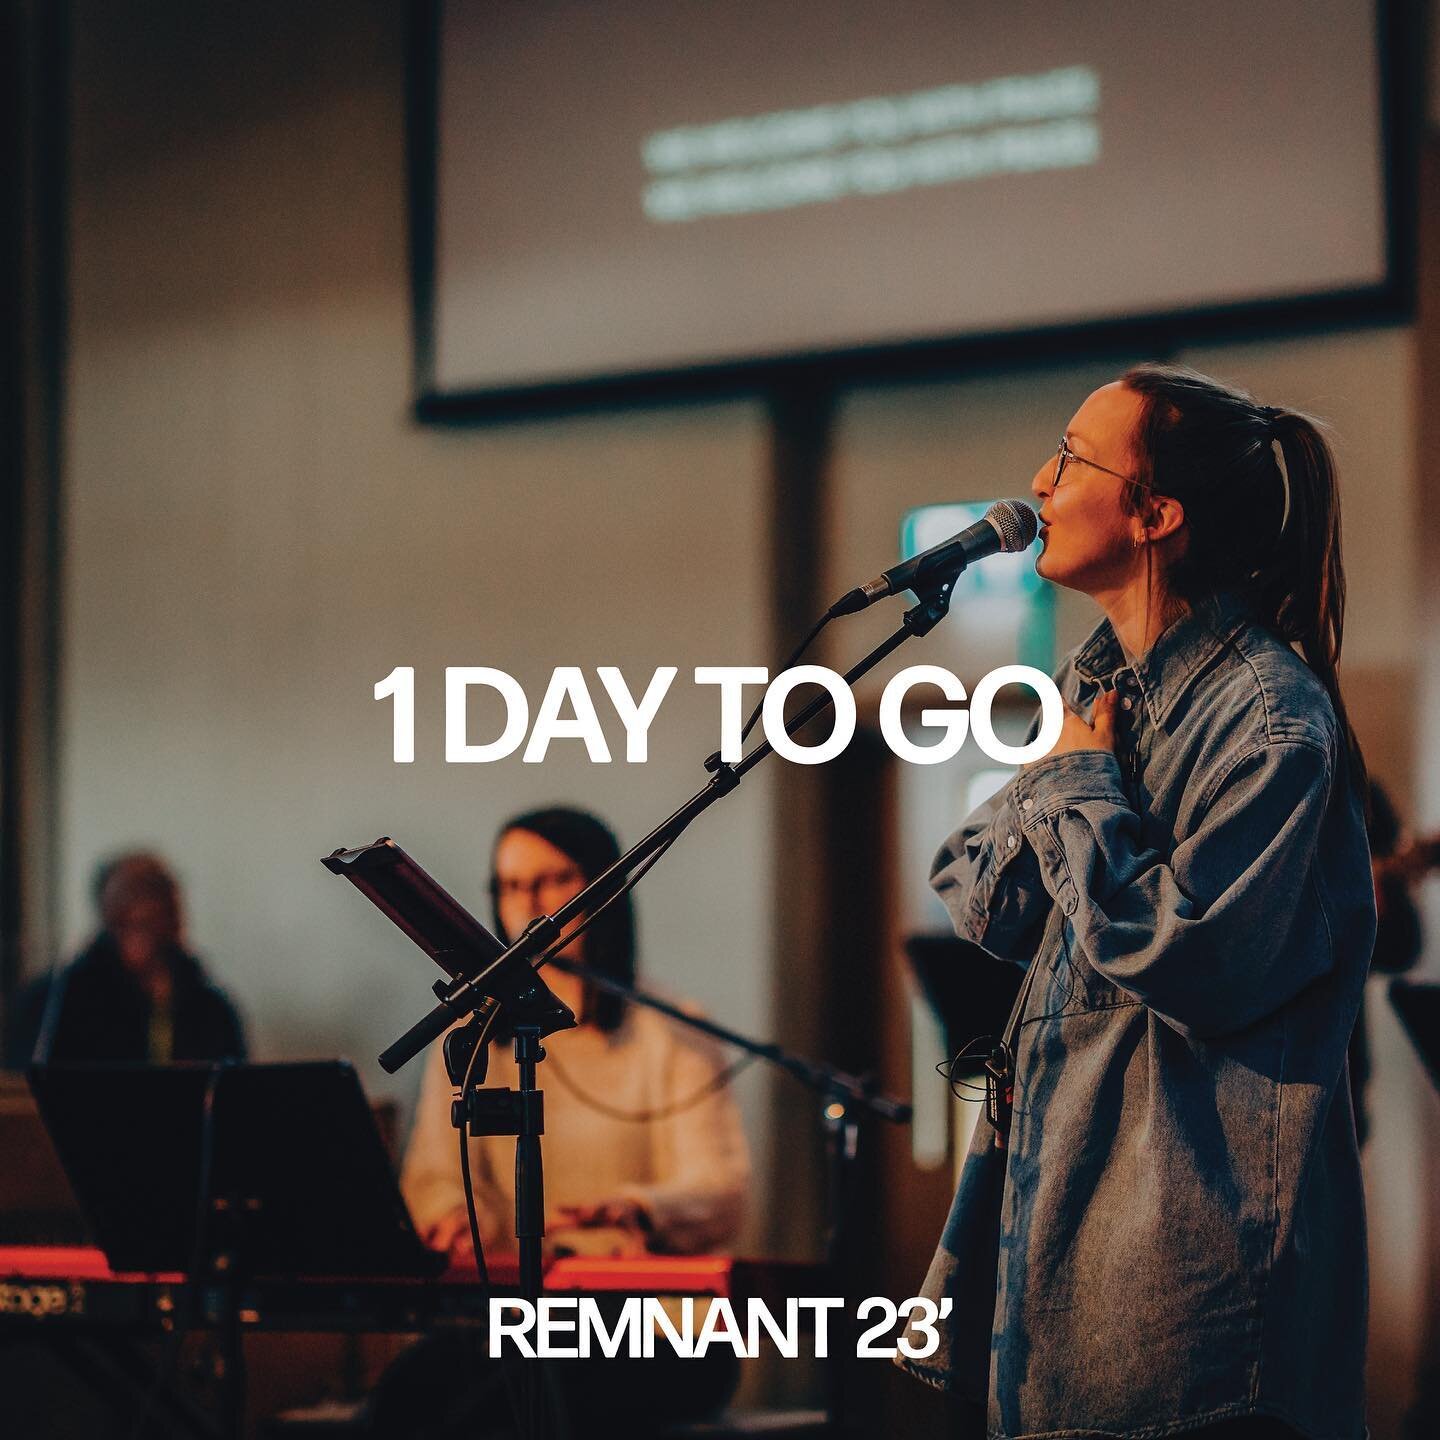 JUST ONE DAY TO GO!🔔

Just 24 hours until our first ever Remnant event!

Come along and get involved as we gather a Remnant of Young Adults.

⏰Saturday 25th March at 8pm(doors open at 7.30)

📍 @churchcarnmoney